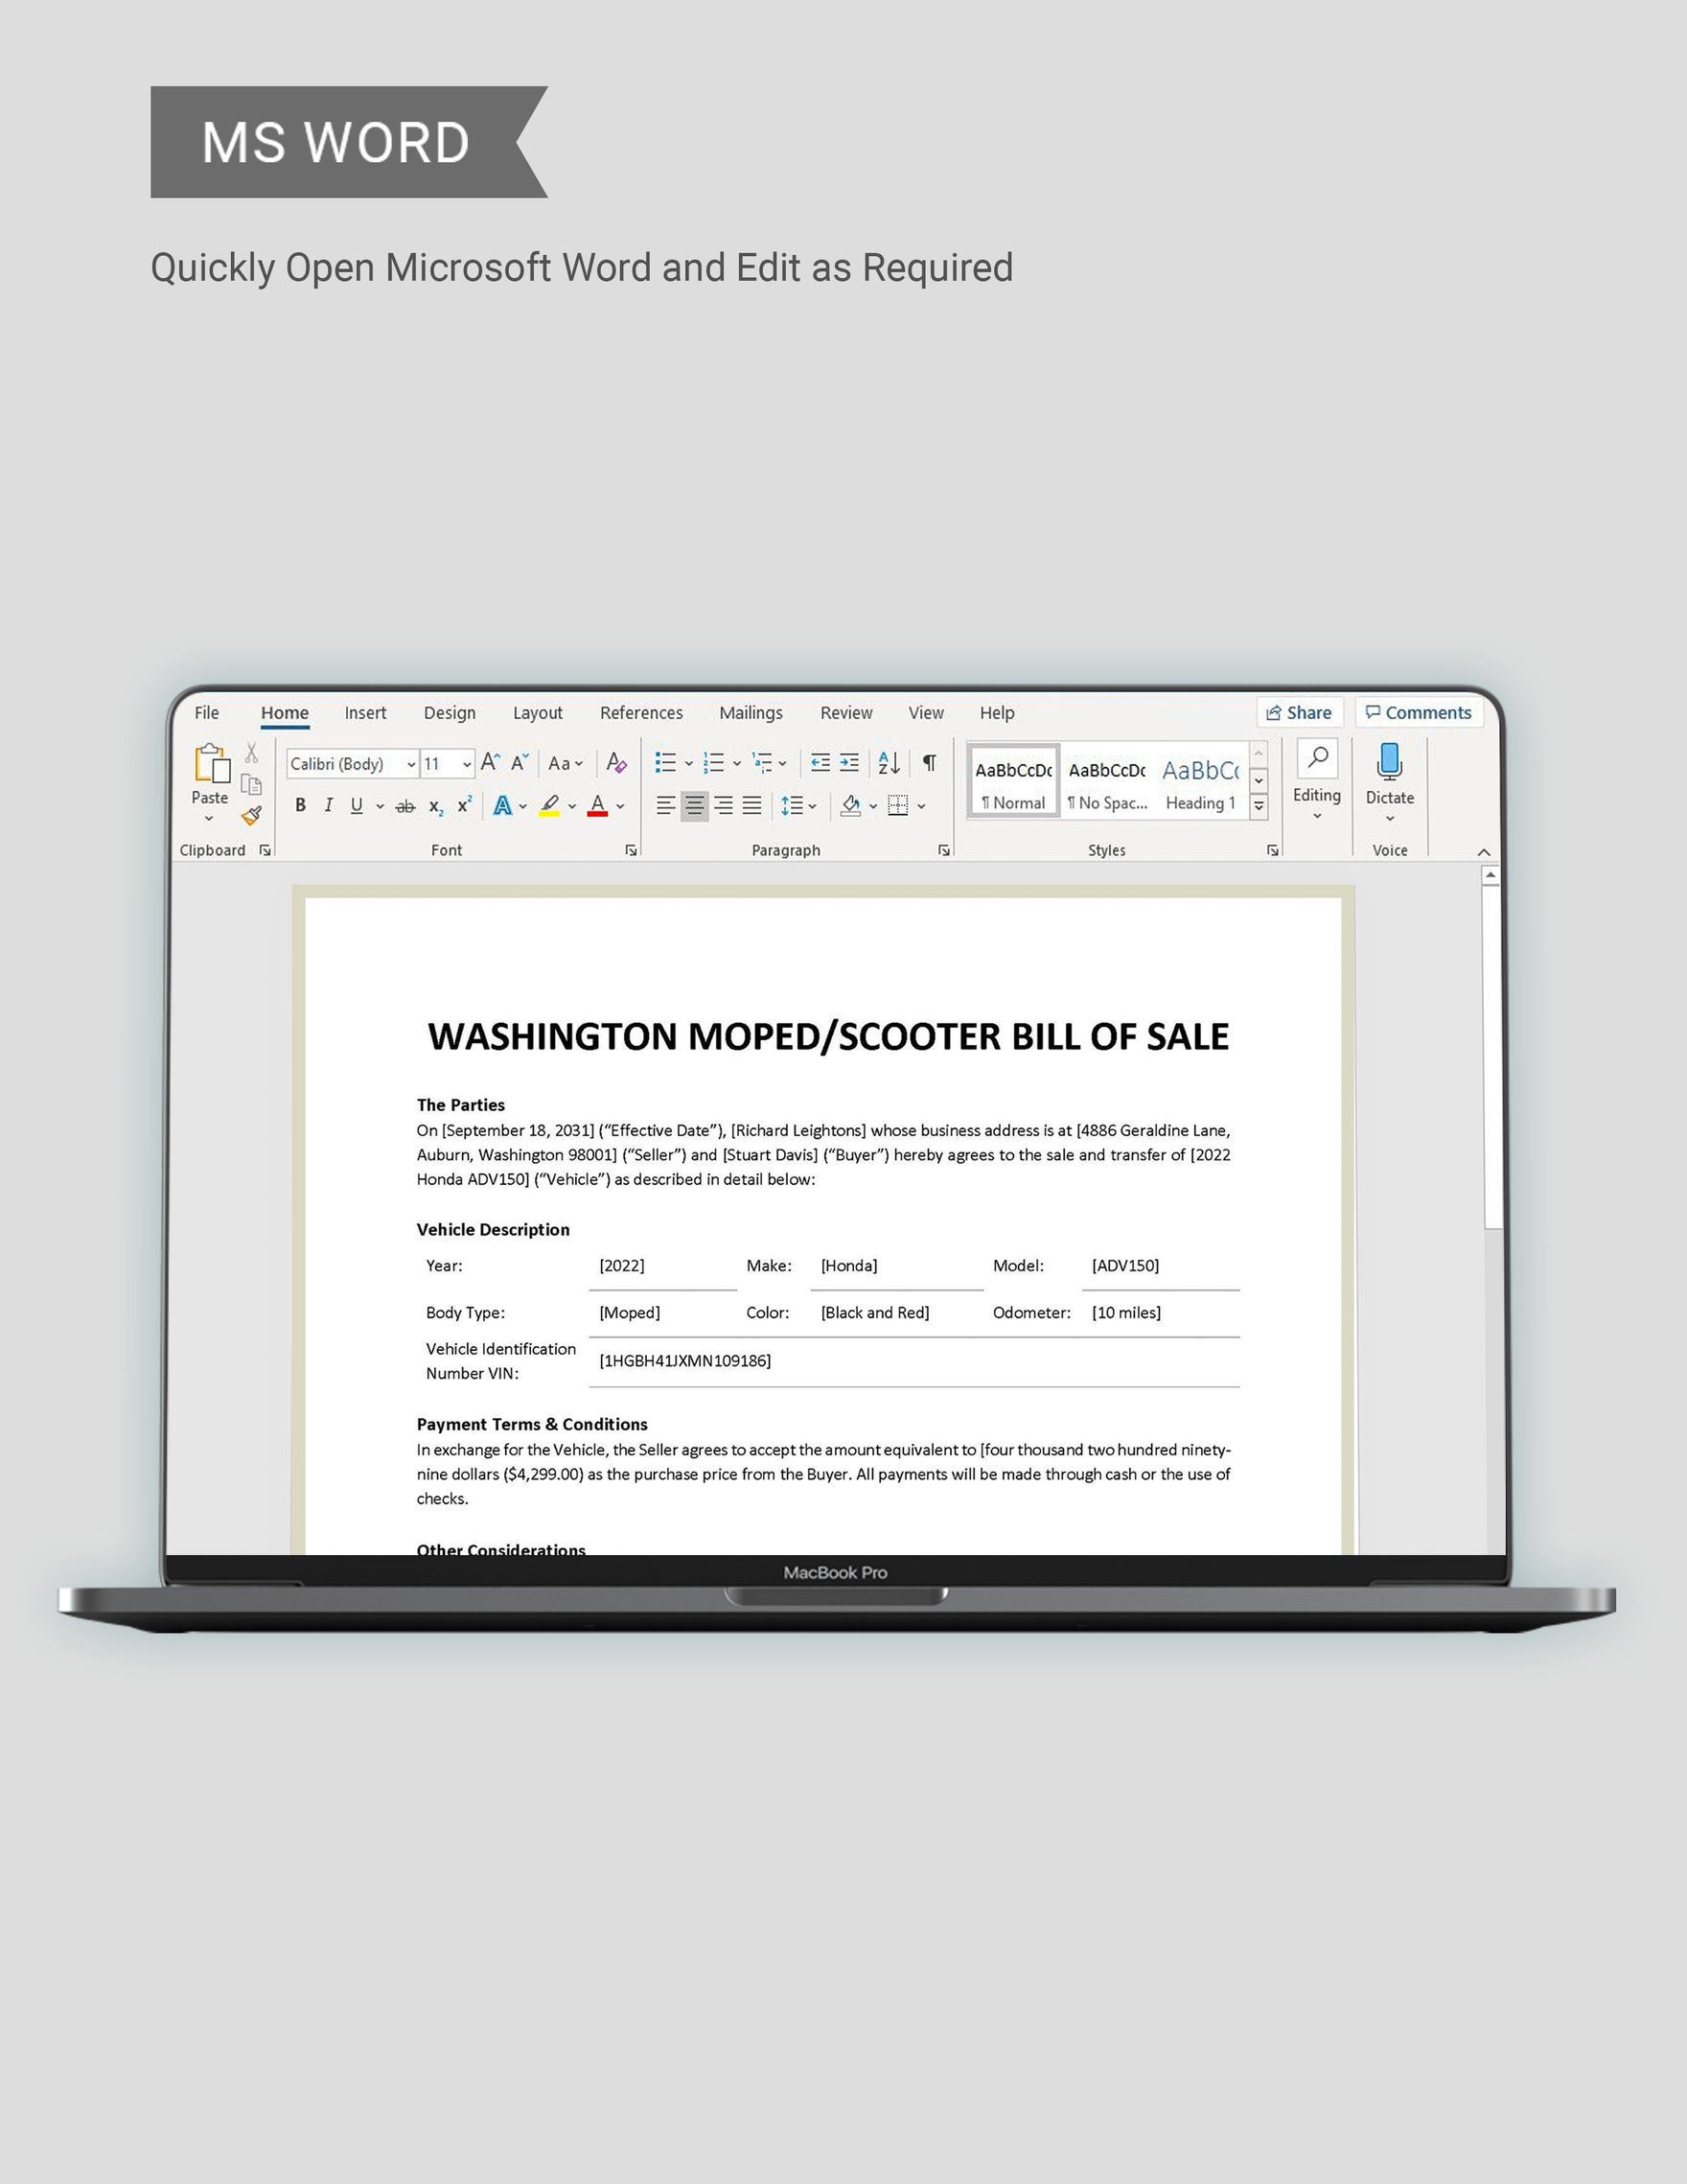 Washington Moped / Scooter Bill of Sale Form Template